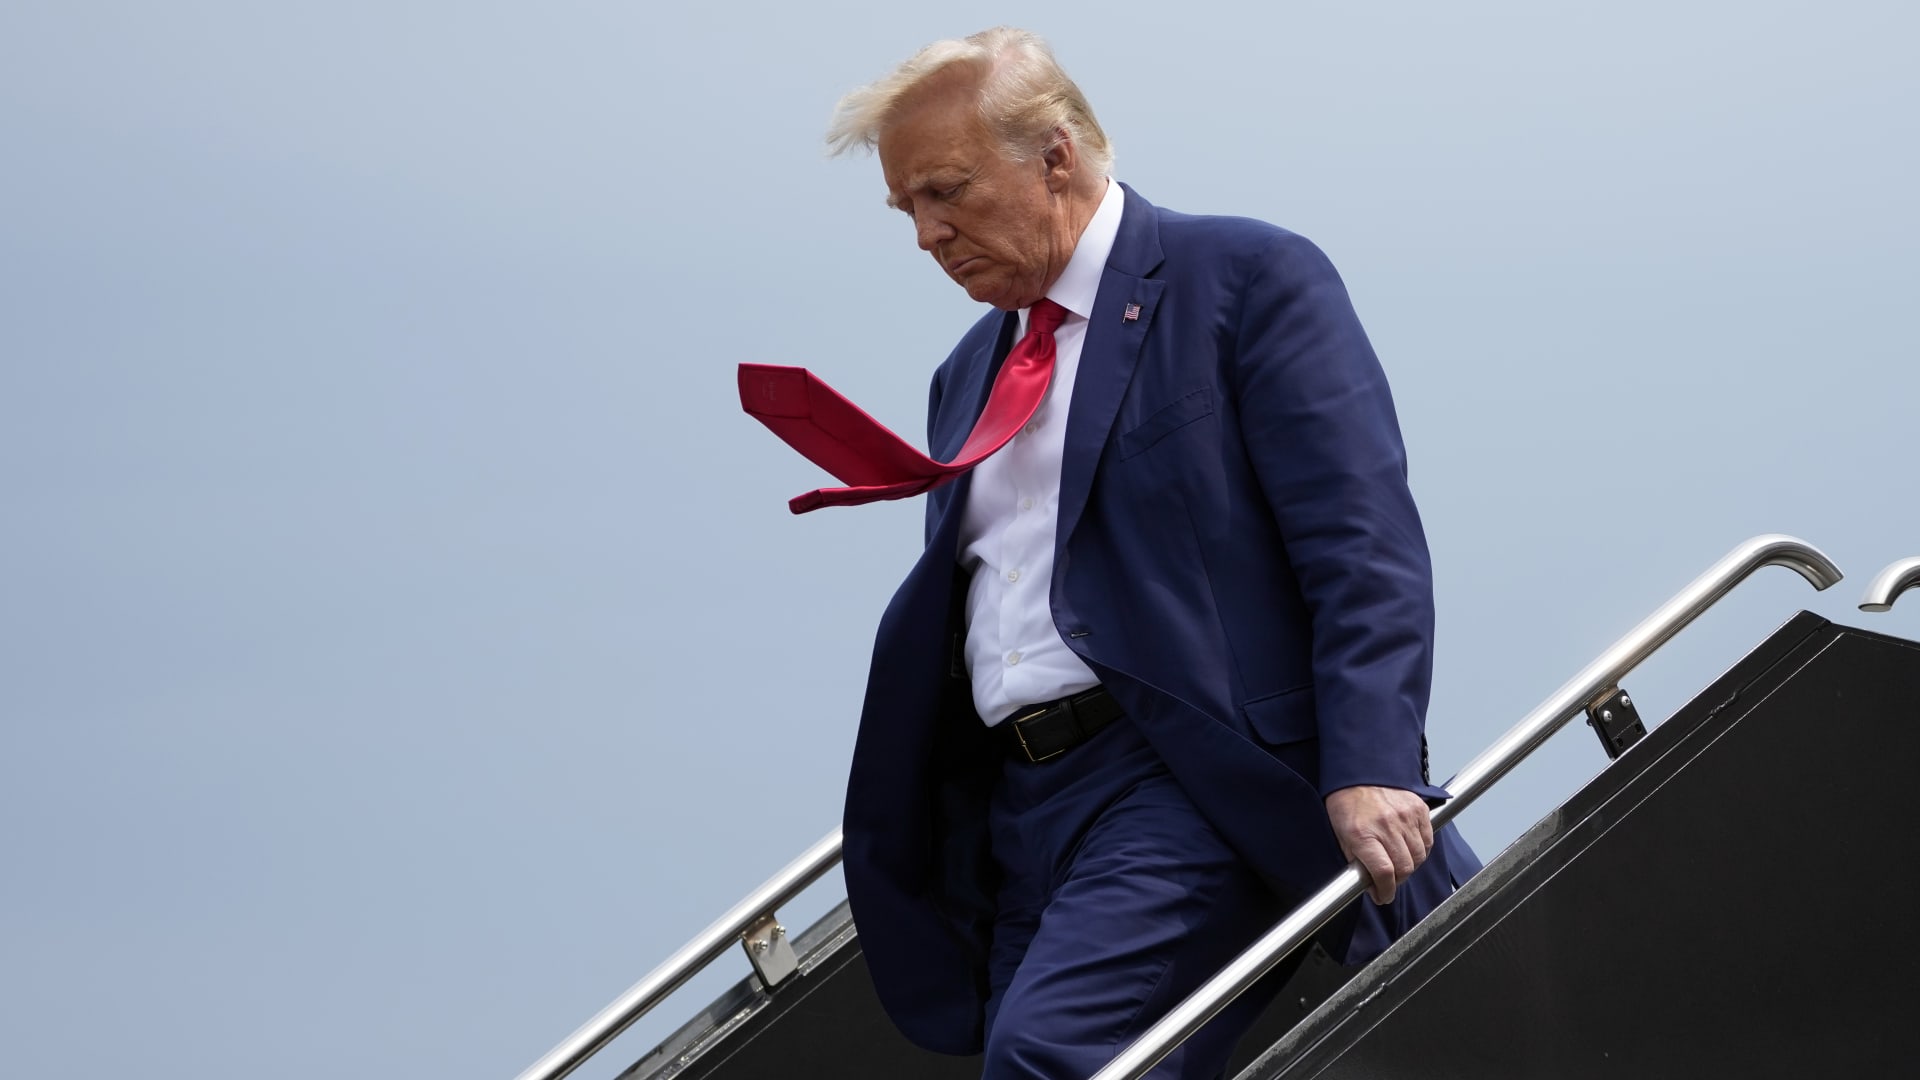 Former President Donald Trump arrives at Ronald Reagan Washington National Airport, Thursday, Aug. 3, 2023, in Arlington, Va., as he heads to Washington to face a judge on federal conspiracy charges alleging Trump conspired to subvert the 2020 election.